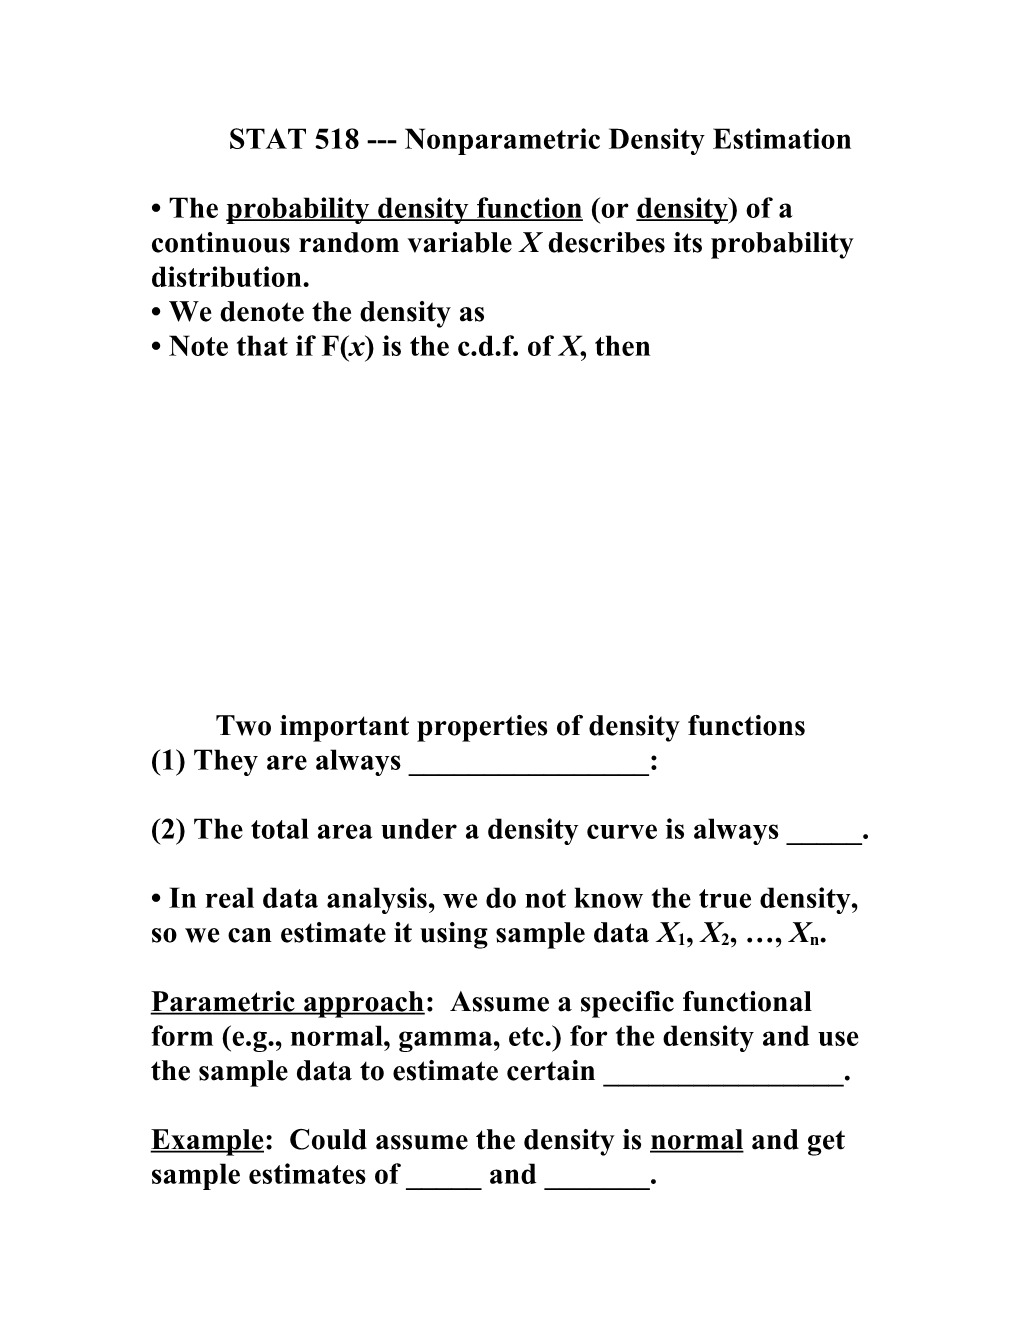 STAT 515 Chapter 3: Probability s1